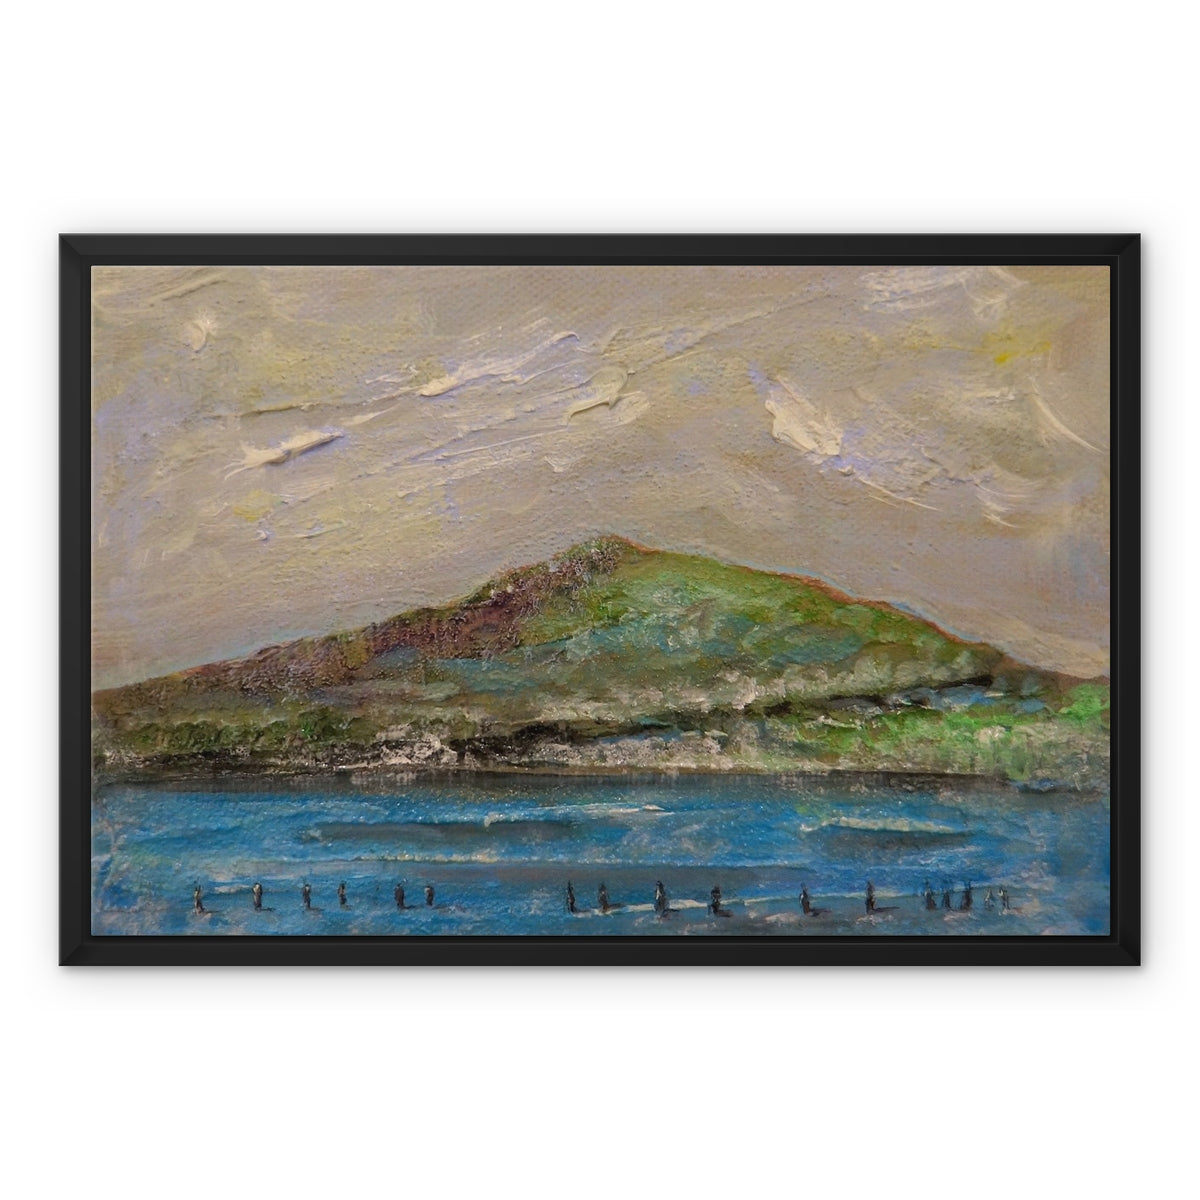 Ben Lomond iii Painting | Framed Canvas From Scotland-Floating Framed Canvas Prints-Scottish Lochs & Mountains Art Gallery-24"x18"-Black Frame-Paintings, Prints, Homeware, Art Gifts From Scotland By Scottish Artist Kevin Hunter